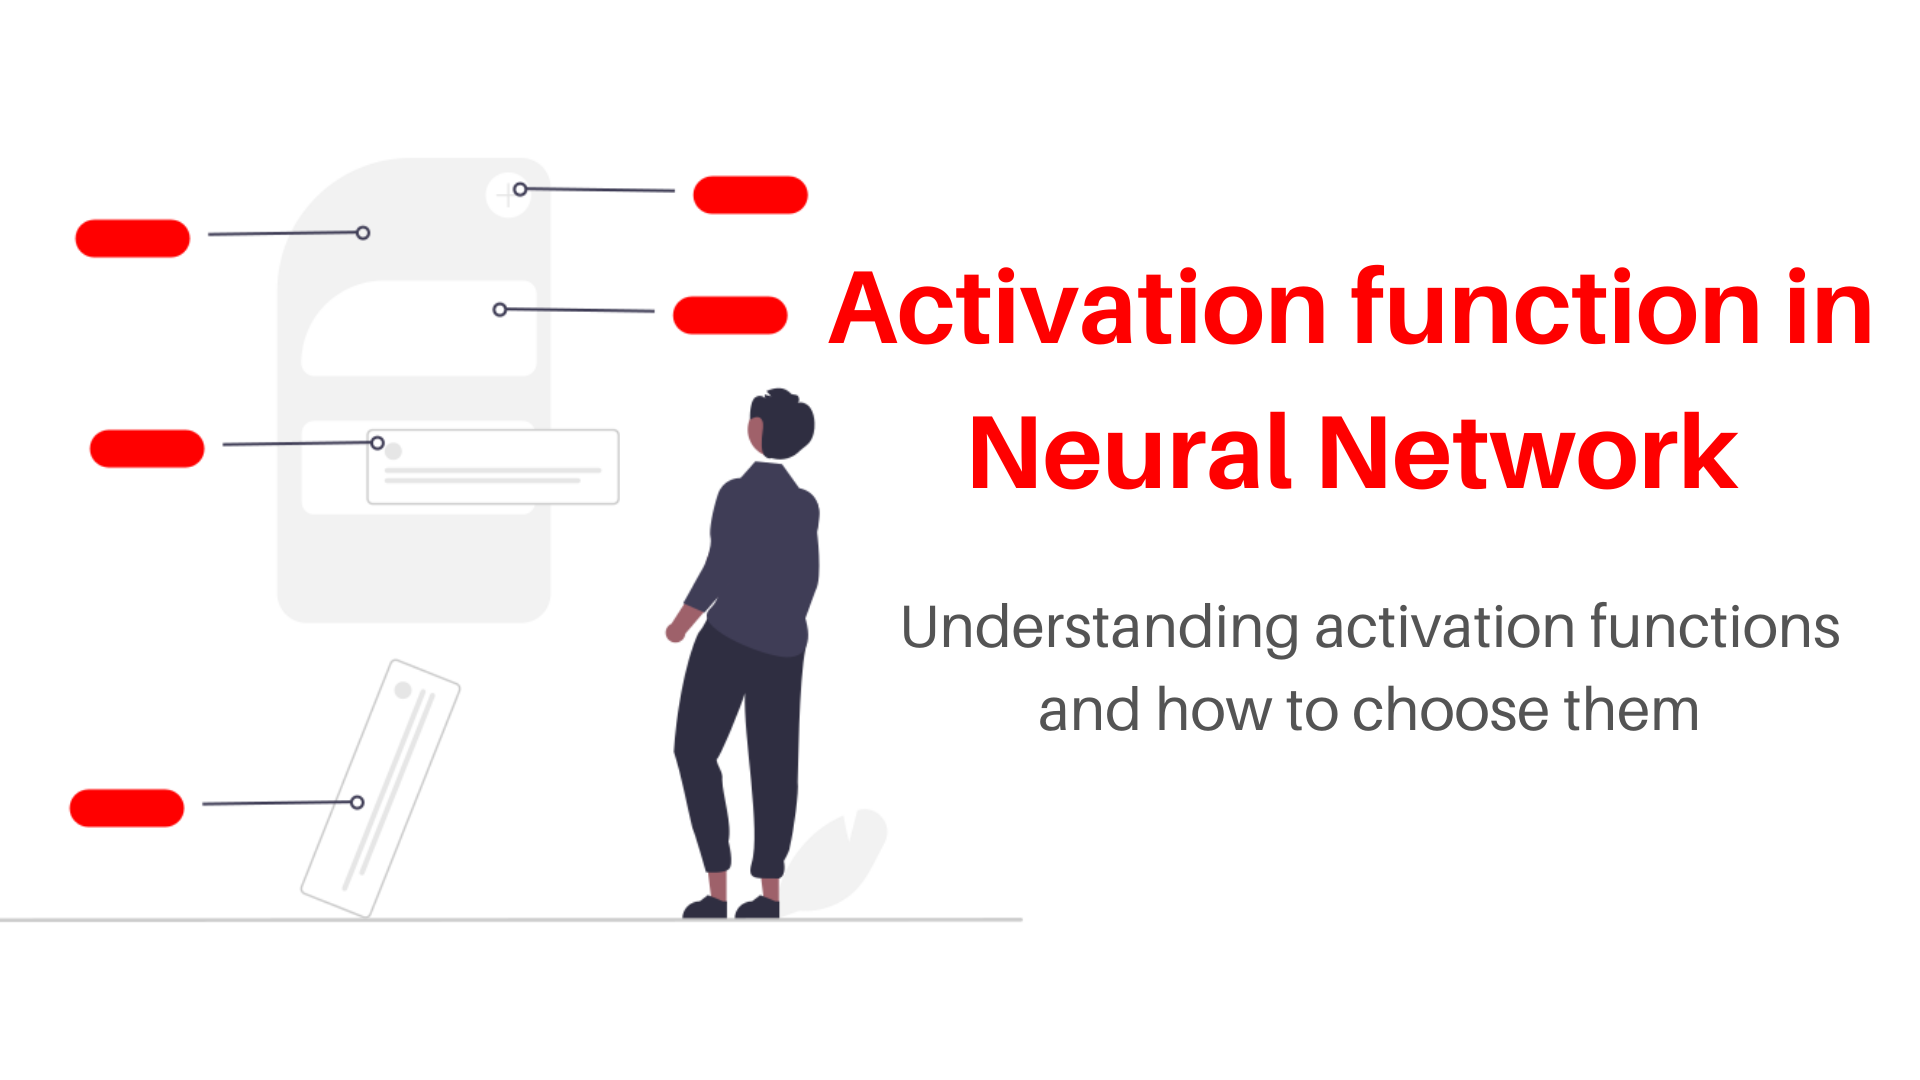 How to choose activation function in neural network